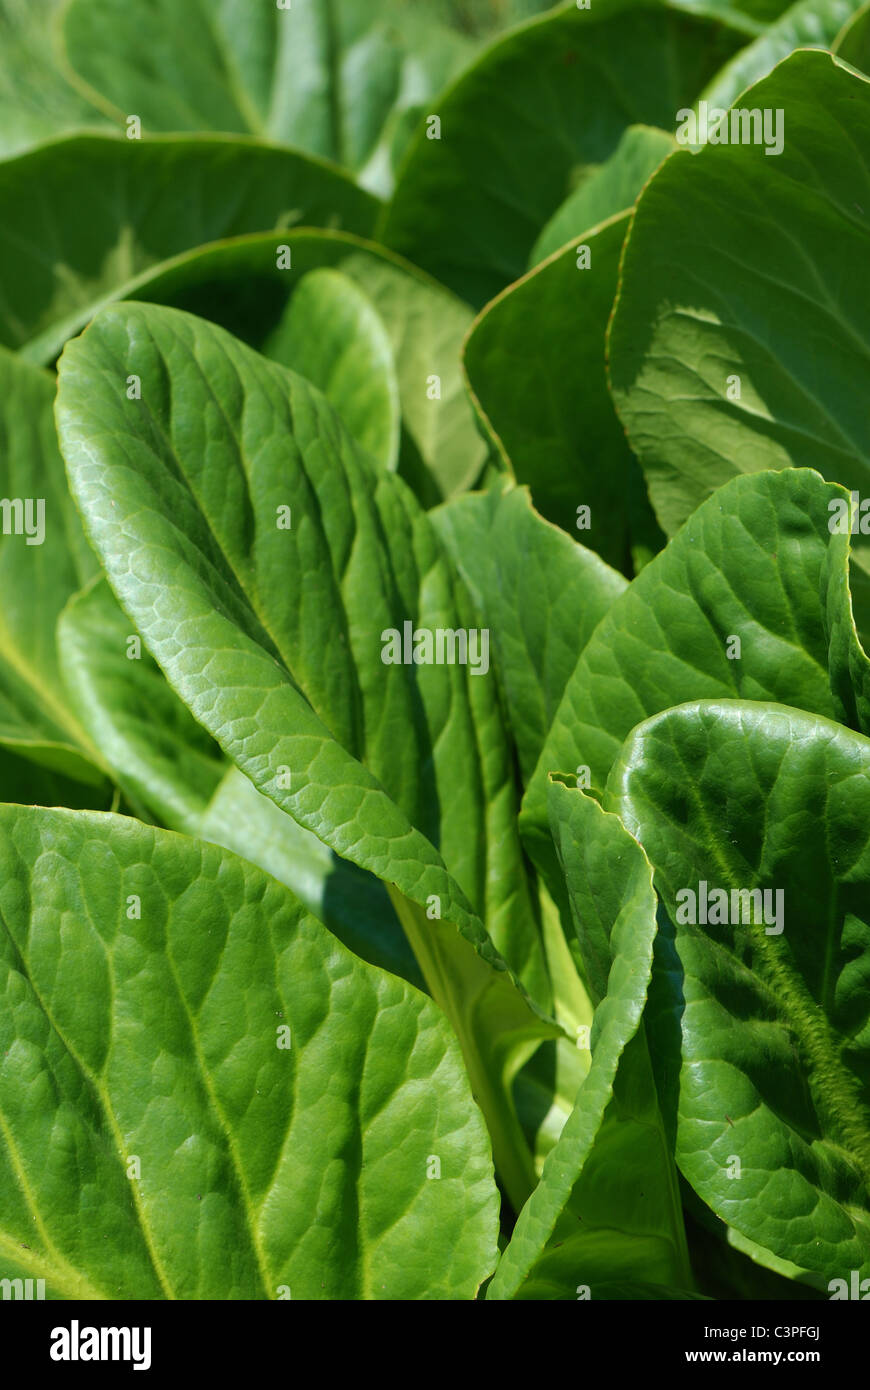 mellow green leaves, background Stock Photo